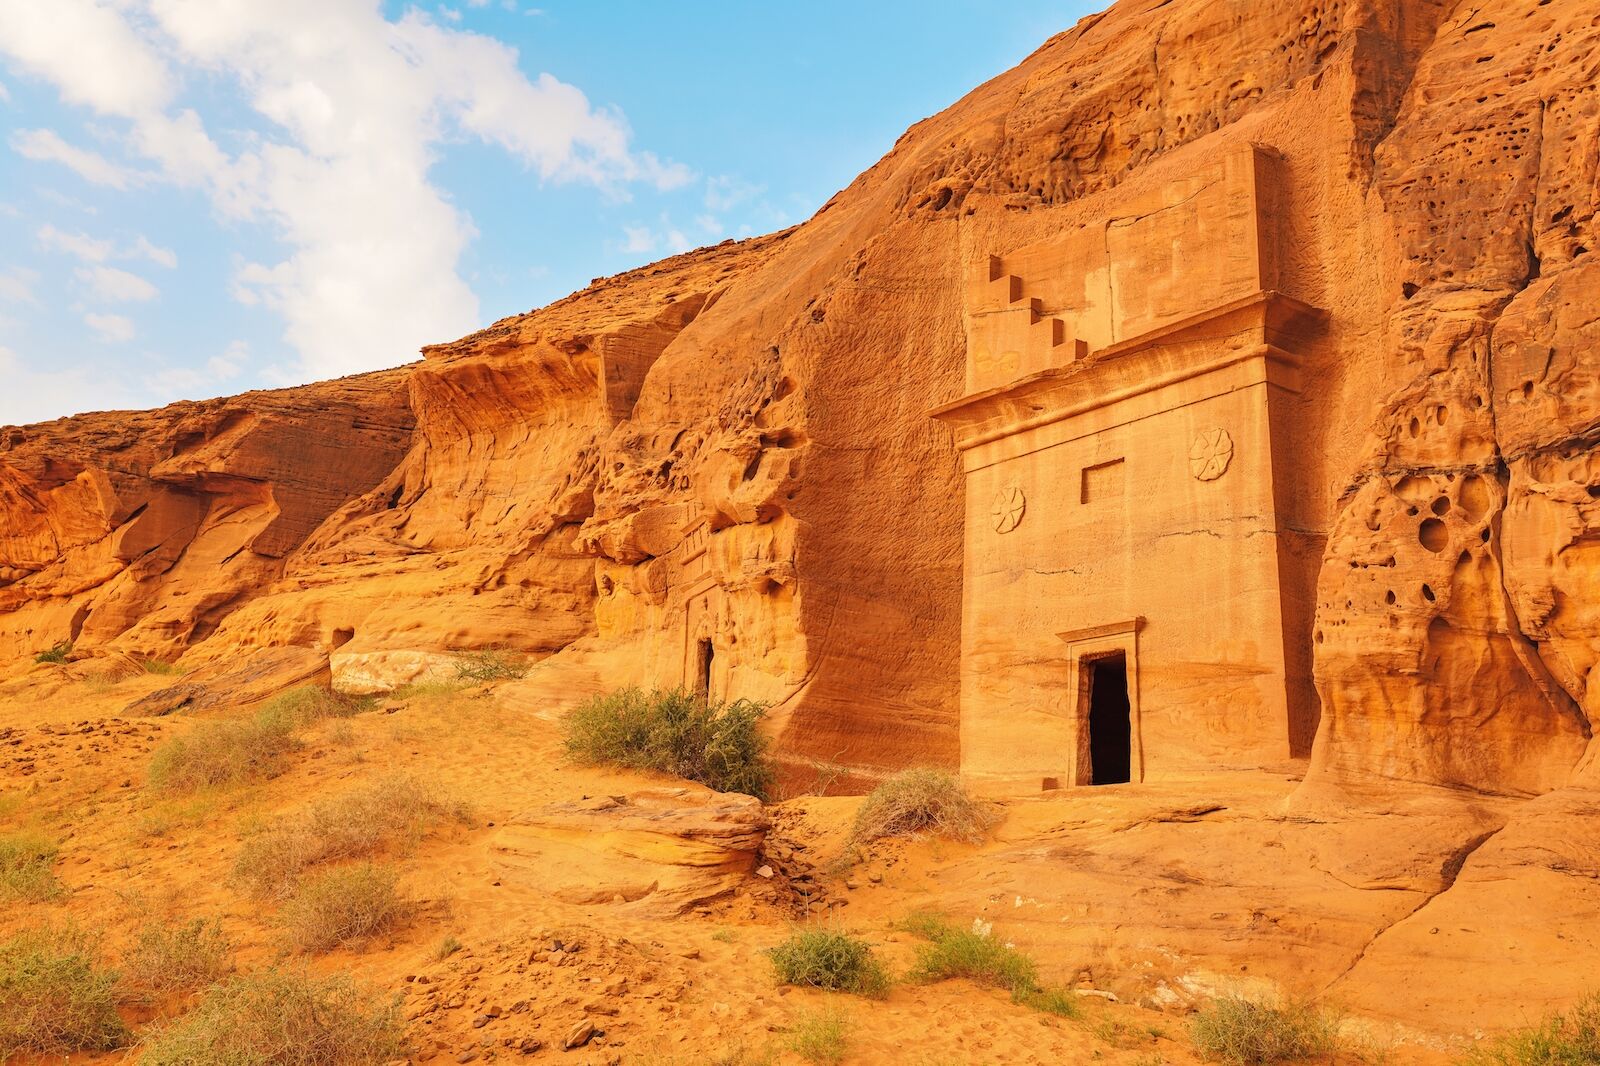 The Hegra archeological site, also known as Mada’in Saleh, in Saudi Arabia